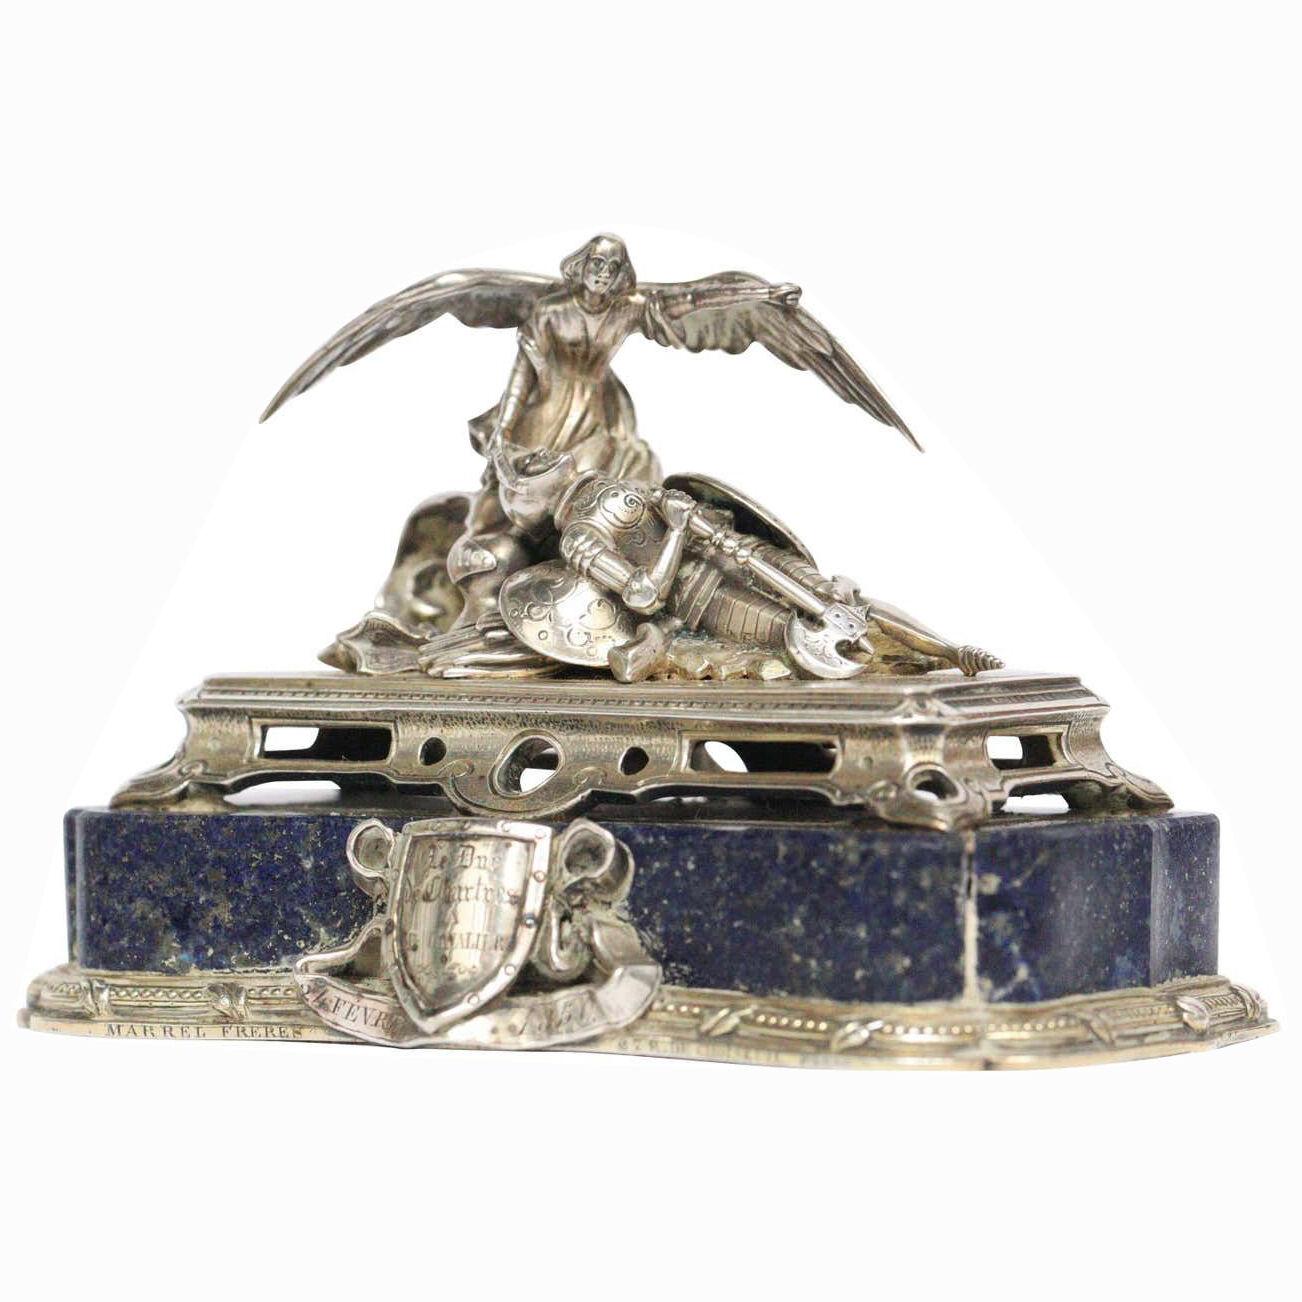 "La Mort du Chevalier Bayard" A French 19th Century Silver and Lapis Paperweight